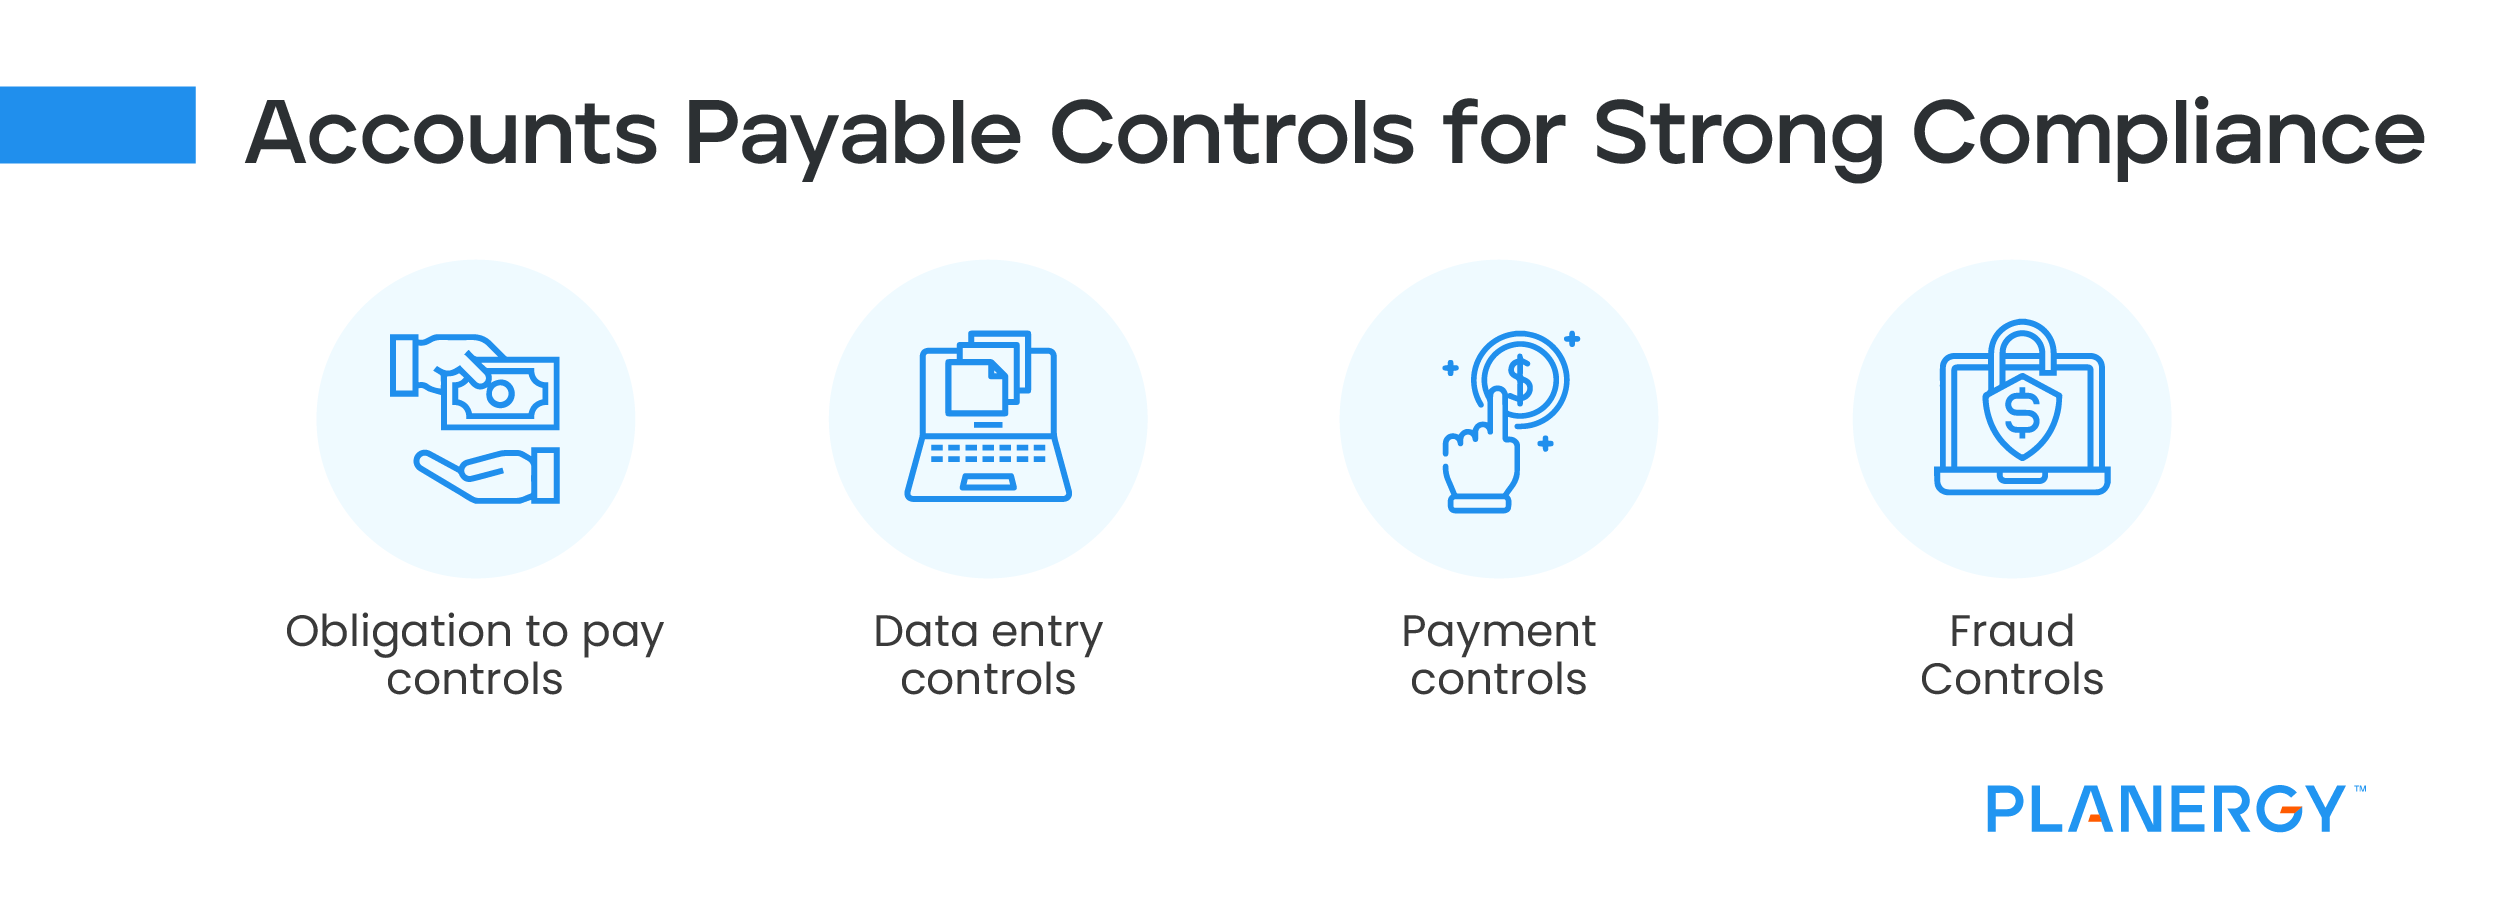 Accounts Payable Controls for Strong Compliance